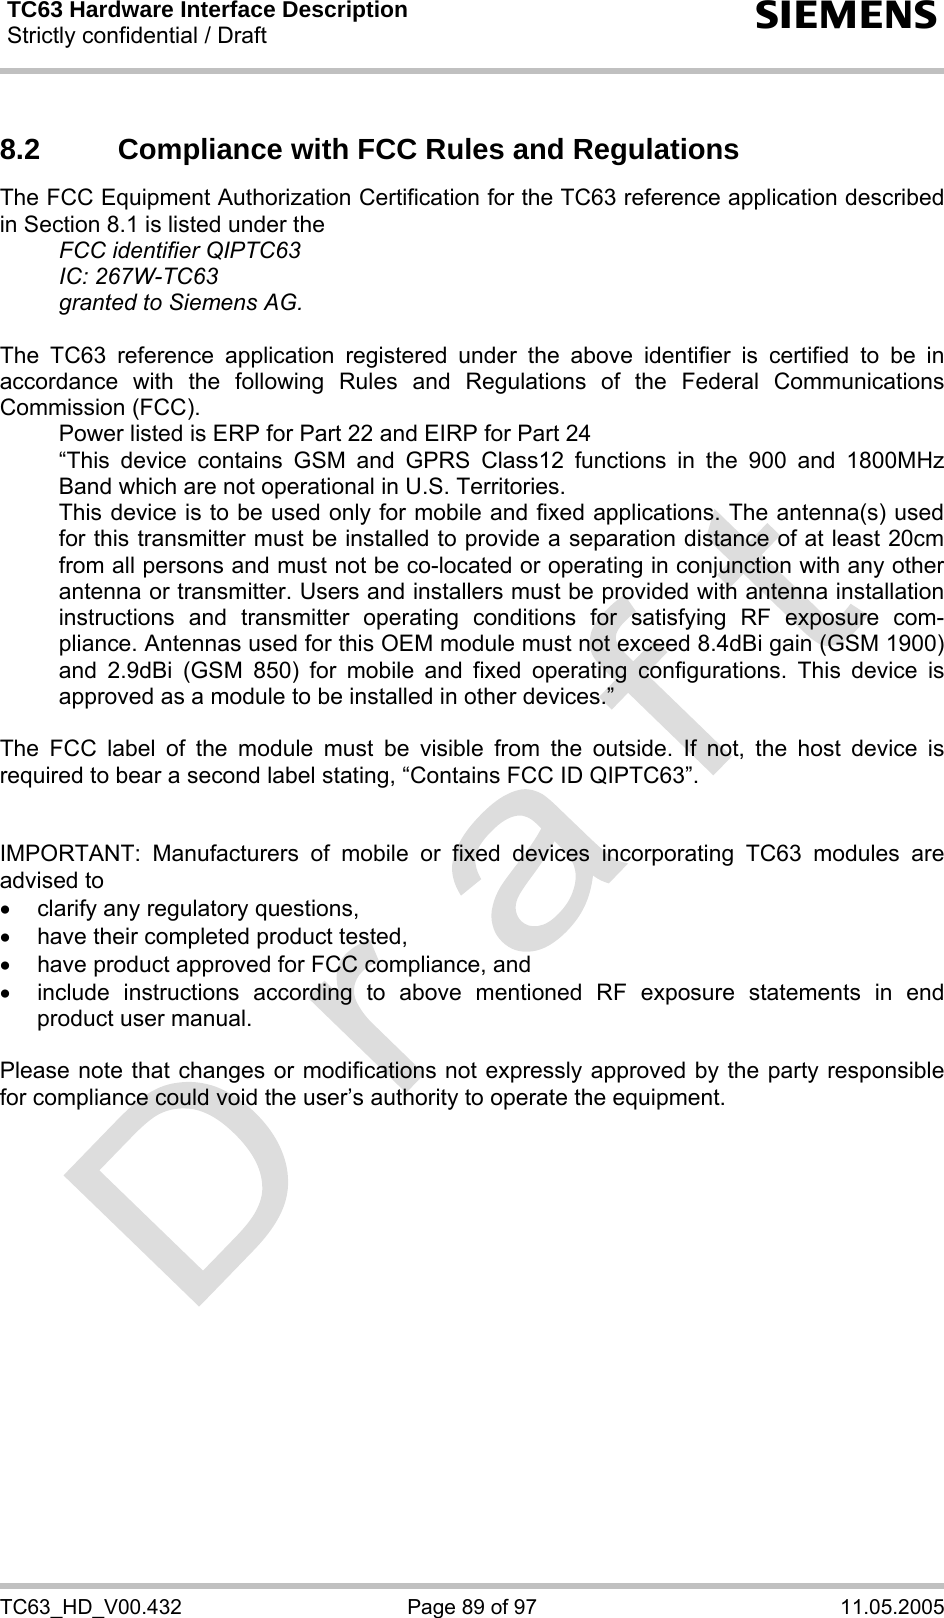 TC63 Hardware Interface Description Strictly confidential / Draft  s TC63_HD_V00.432  Page 89 of 97  11.05.2005 8.2  Compliance with FCC Rules and Regulations  The FCC Equipment Authorization Certification for the TC63 reference application described in Section 8.1 is listed under the   FCC identifier QIPTC63  IC: 267W-TC63   granted to Siemens AG.   The TC63 reference application registered under the above identifier is certified to be in accordance with the following Rules and Regulations of the Federal Communications Commission (FCC).    Power listed is ERP for Part 22 and EIRP for Part 24   “This device contains GSM and GPRS Class12 functions in the 900 and 1800MHz Band which are not operational in U.S. Territories.    This device is to be used only for mobile and fixed applications. The antenna(s) used for this transmitter must be installed to provide a separation distance of at least 20cm from all persons and must not be co-located or operating in conjunction with any other antenna or transmitter. Users and installers must be provided with antenna installation instructions and transmitter operating conditions for satisfying RF exposure com-pliance. Antennas used for this OEM module must not exceed 8.4dBi gain (GSM 1900) and 2.9dBi (GSM 850) for mobile and fixed operating configurations. This device is approved as a module to be installed in other devices.”   The FCC label of the module must be visible from the outside. If not, the host device is required to bear a second label stating, “Contains FCC ID QIPTC63”.   IMPORTANT: Manufacturers of mobile or fixed devices incorporating TC63 modules are advised to •  clarify any regulatory questions, •  have their completed product tested, •  have product approved for FCC compliance, and •  include instructions according to above mentioned RF exposure statements in end product user manual.   Please note that changes or modifications not expressly approved by the party responsible for compliance could void the user’s authority to operate the equipment.  